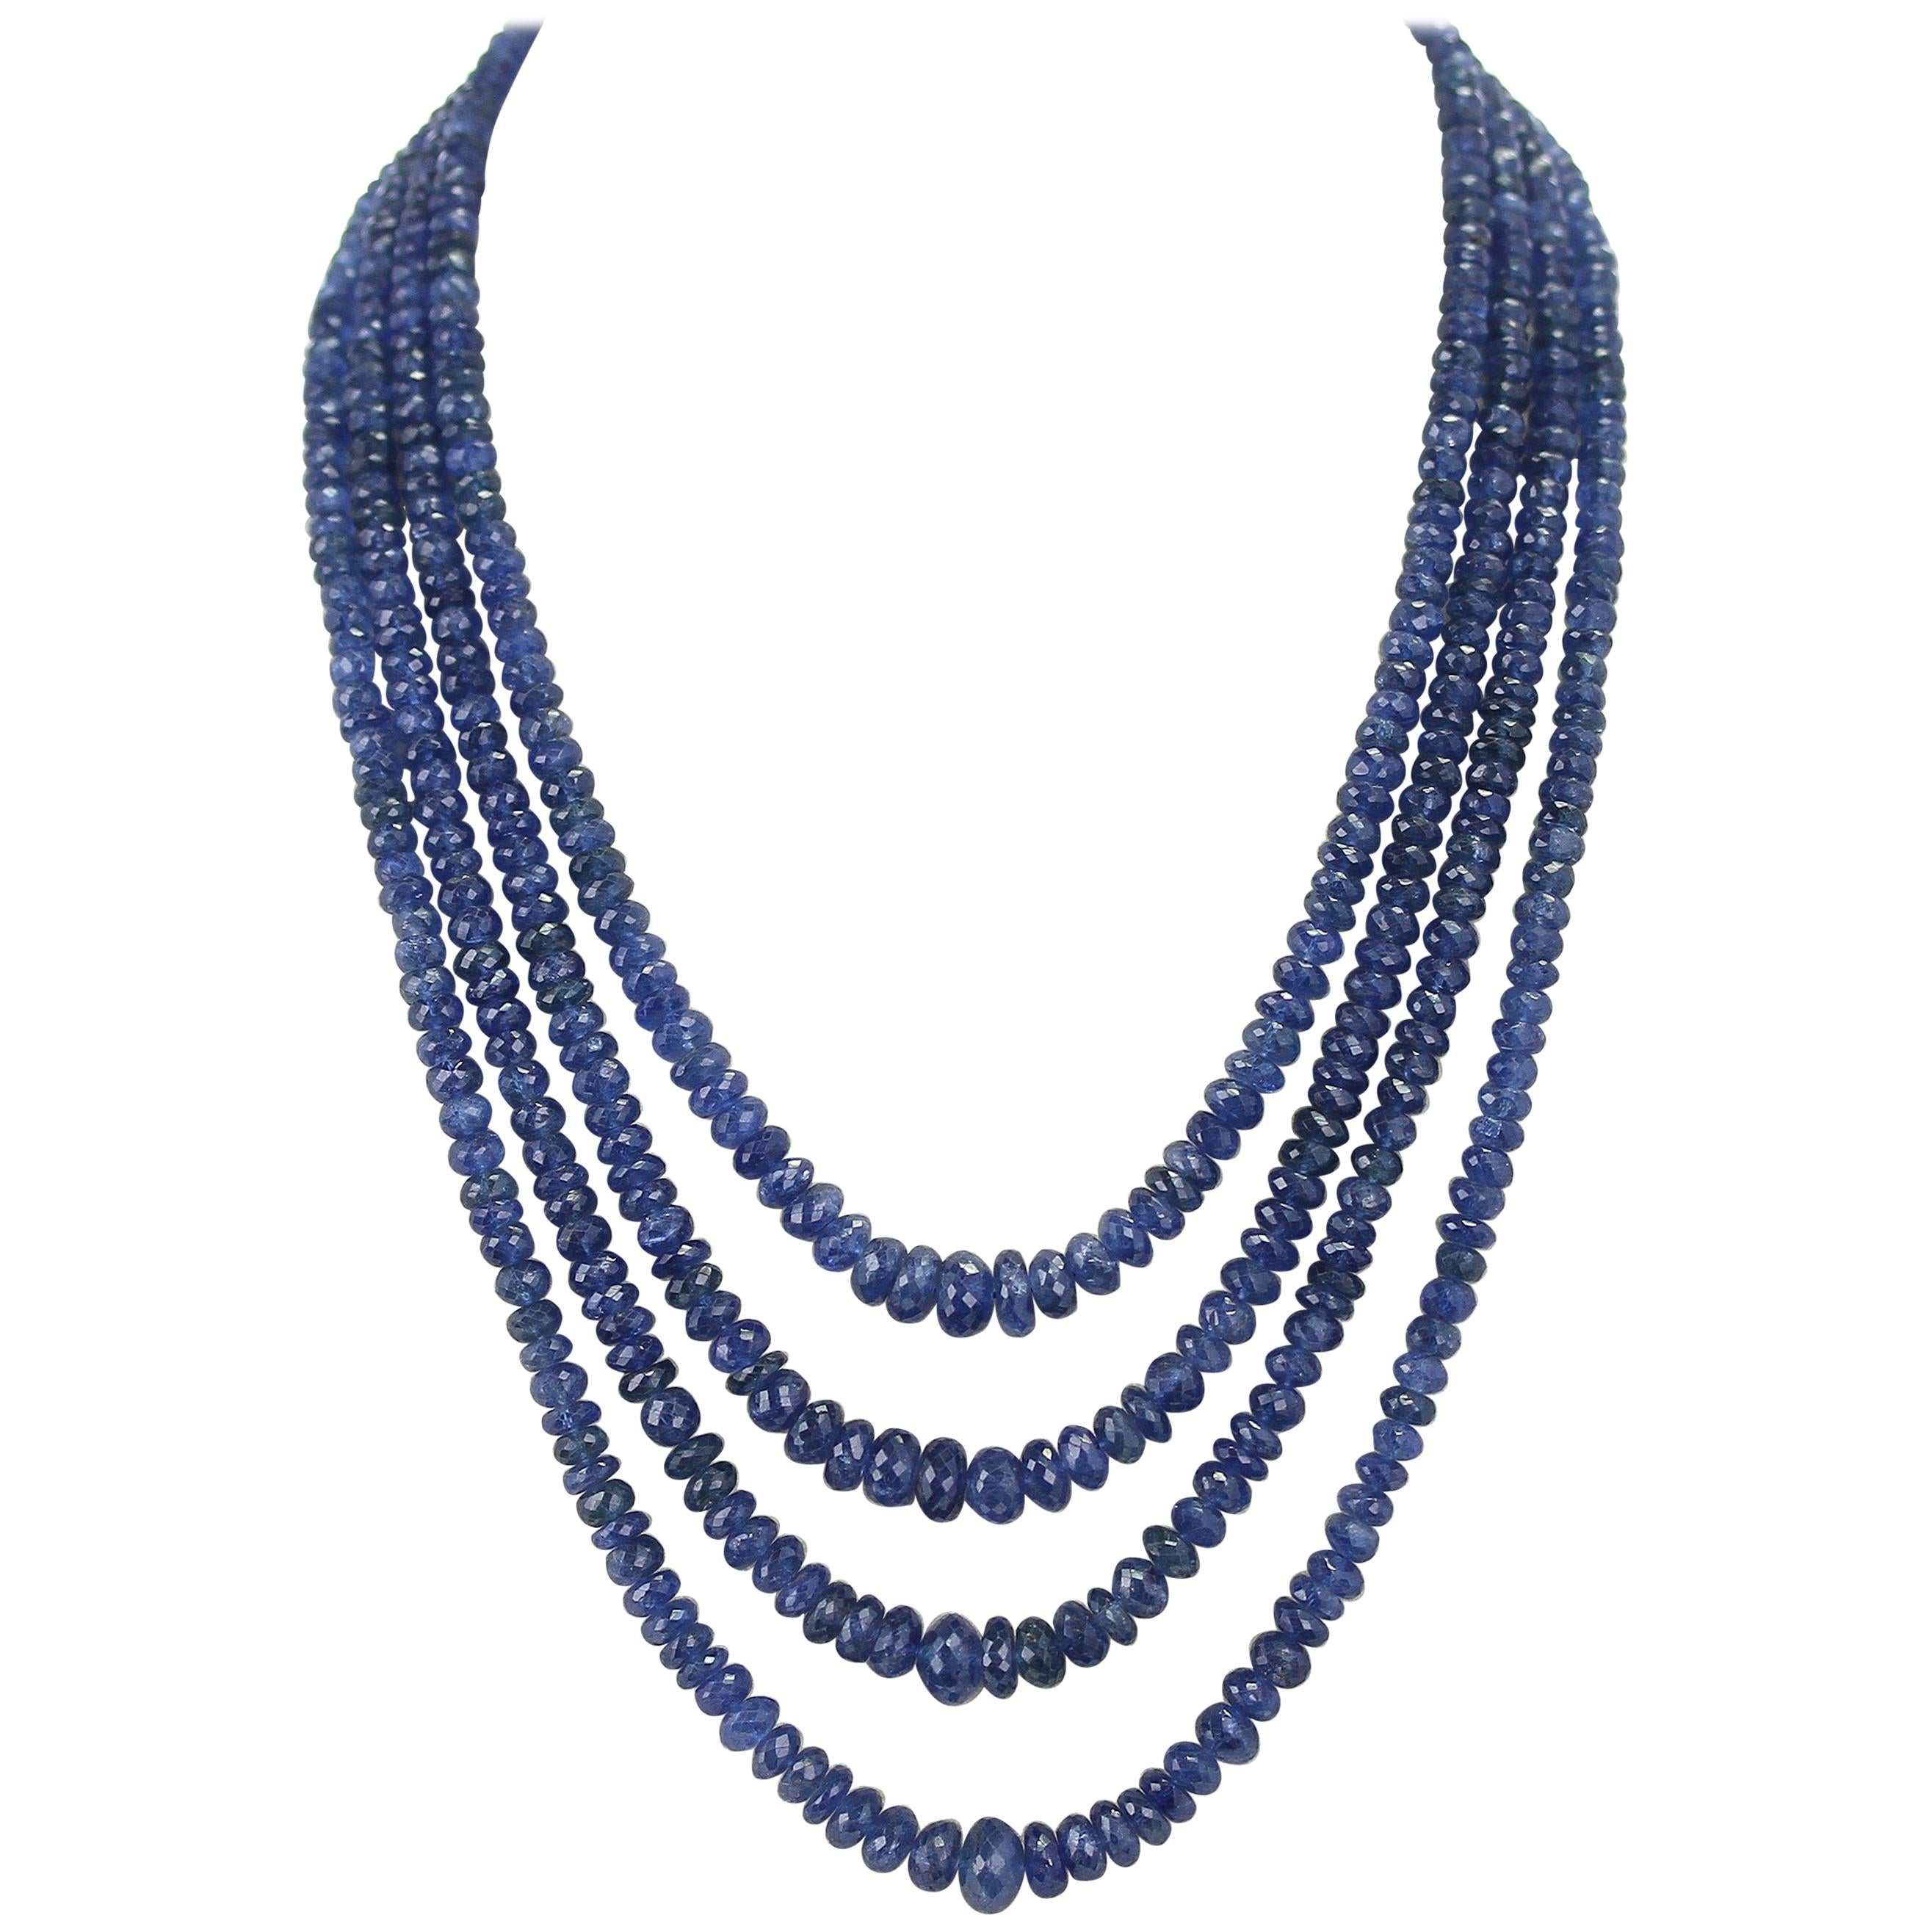 Genuine 7 Rows Natural 2x4mm Blue Sapphire Faceted Gems Beads Necklace 17-23'' 